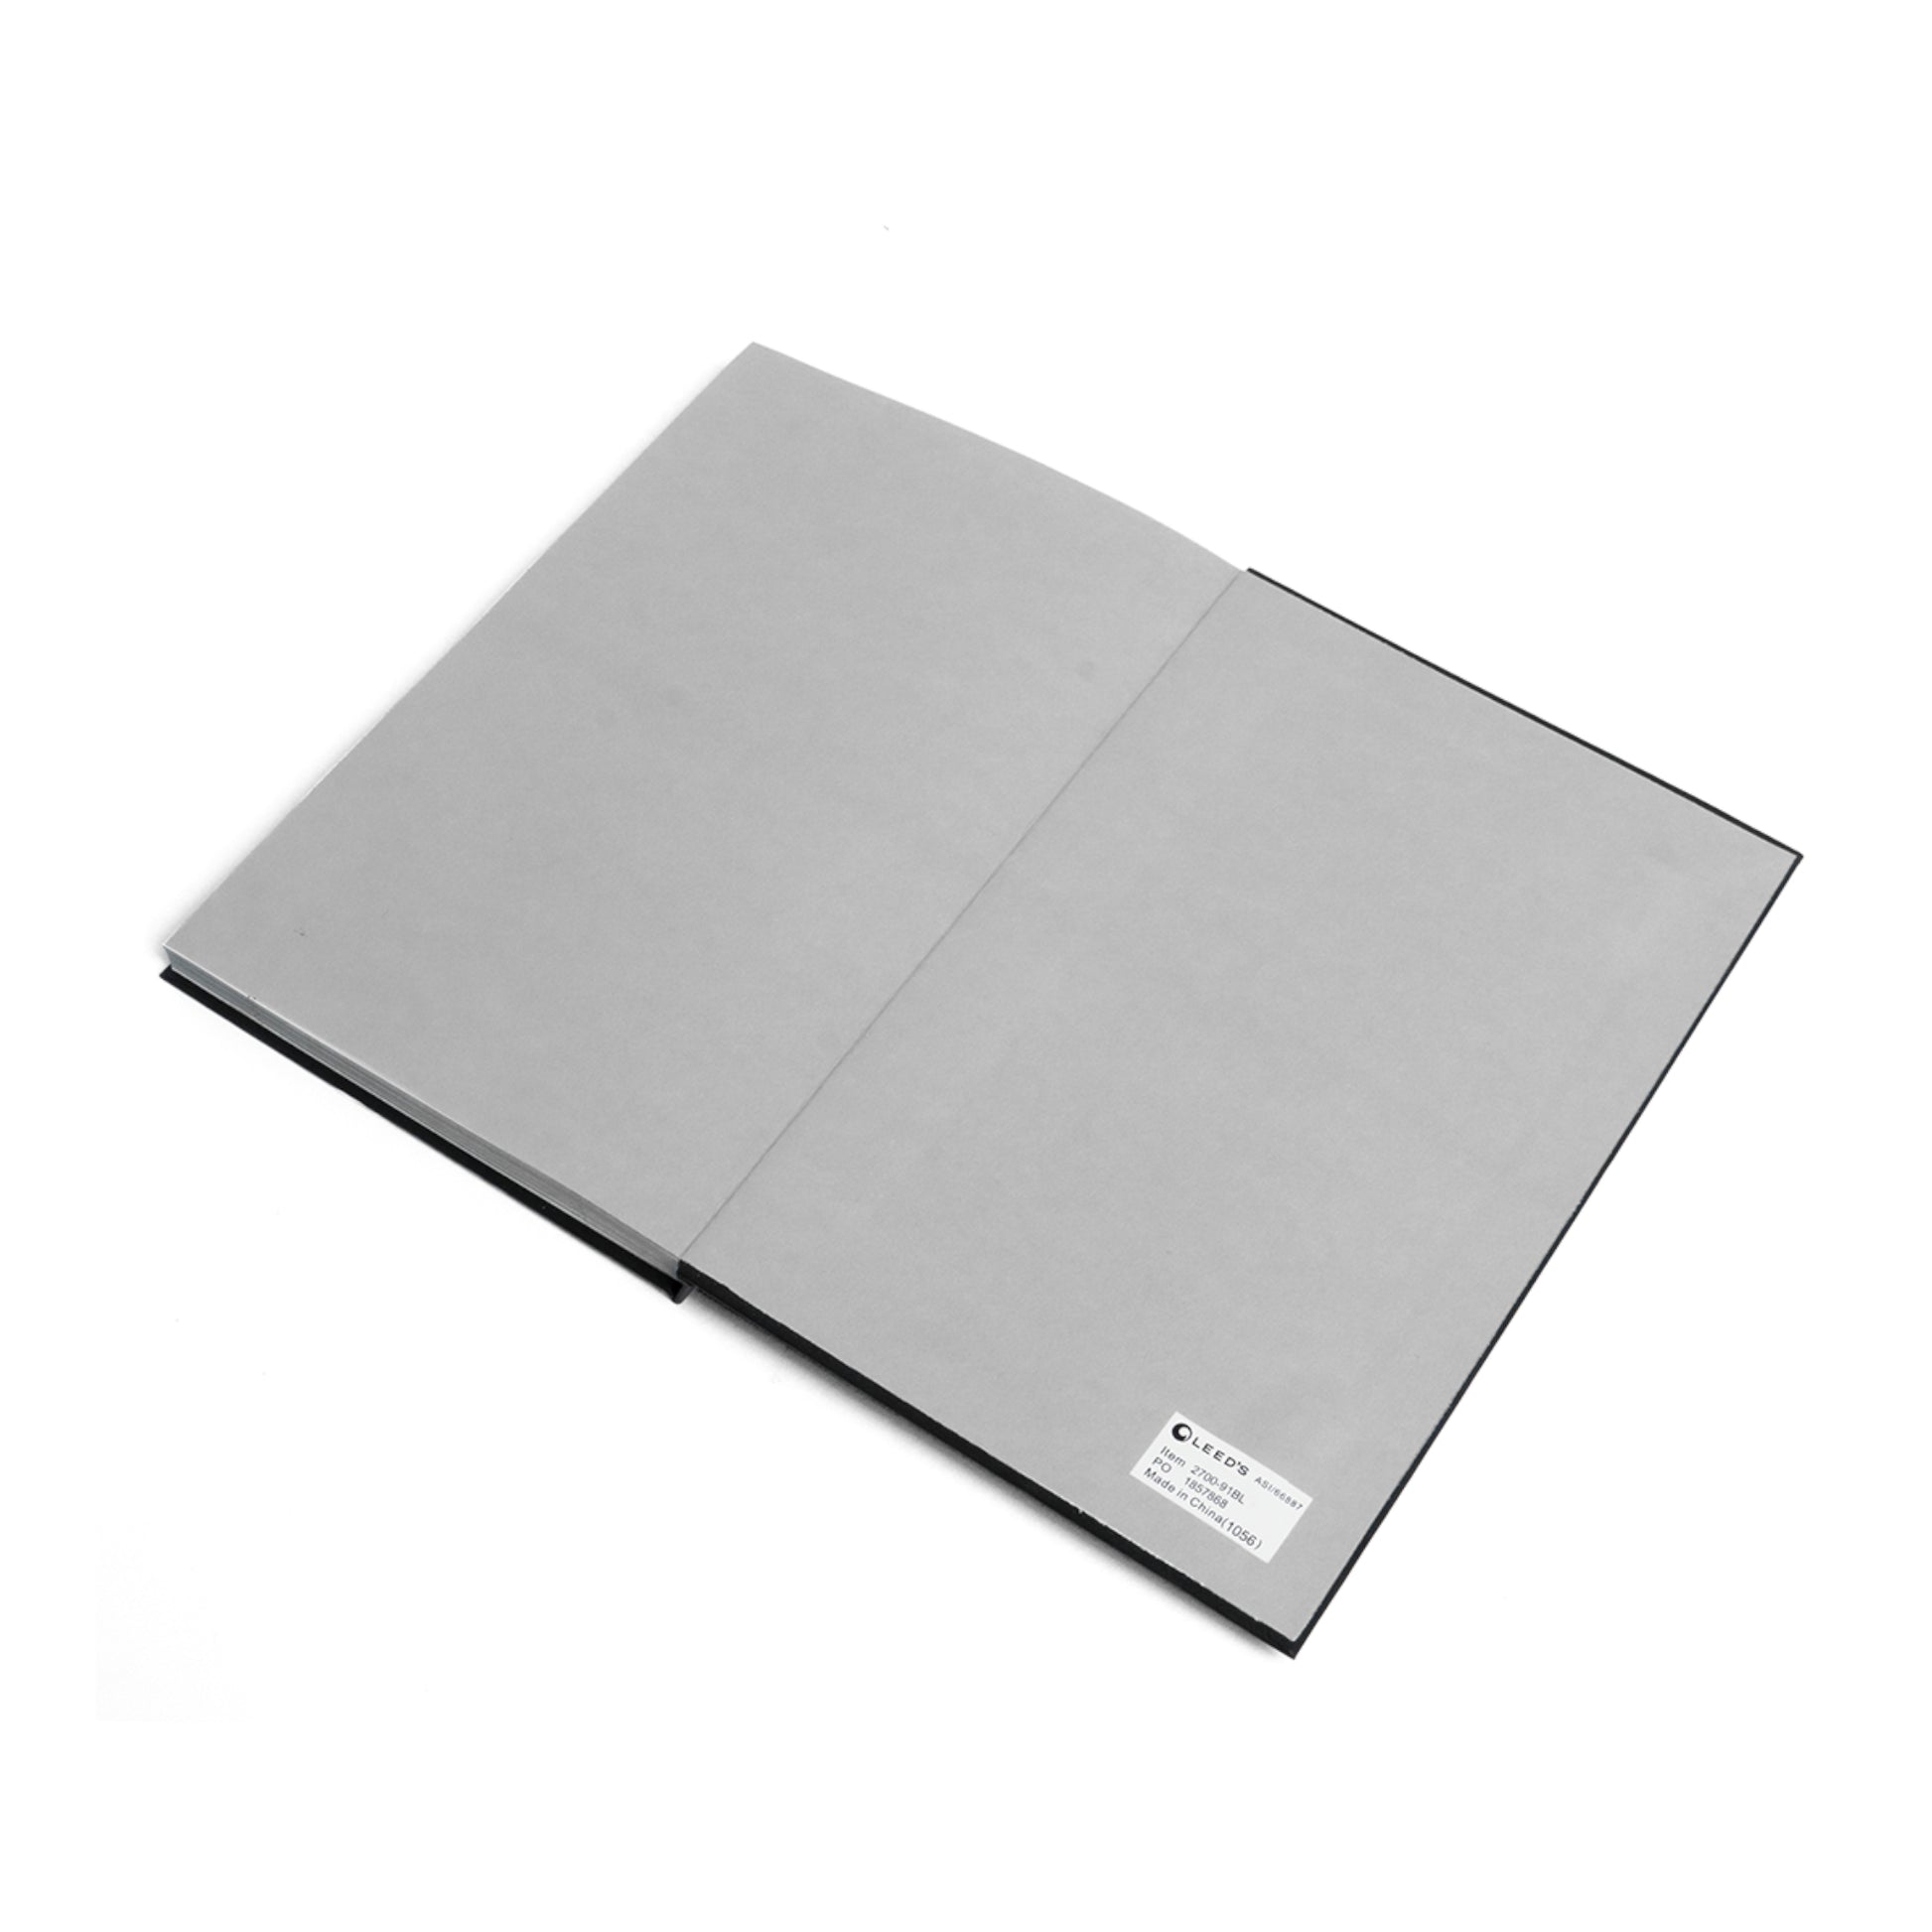 Color Contrast Notebook - Ruled - CRAV Company